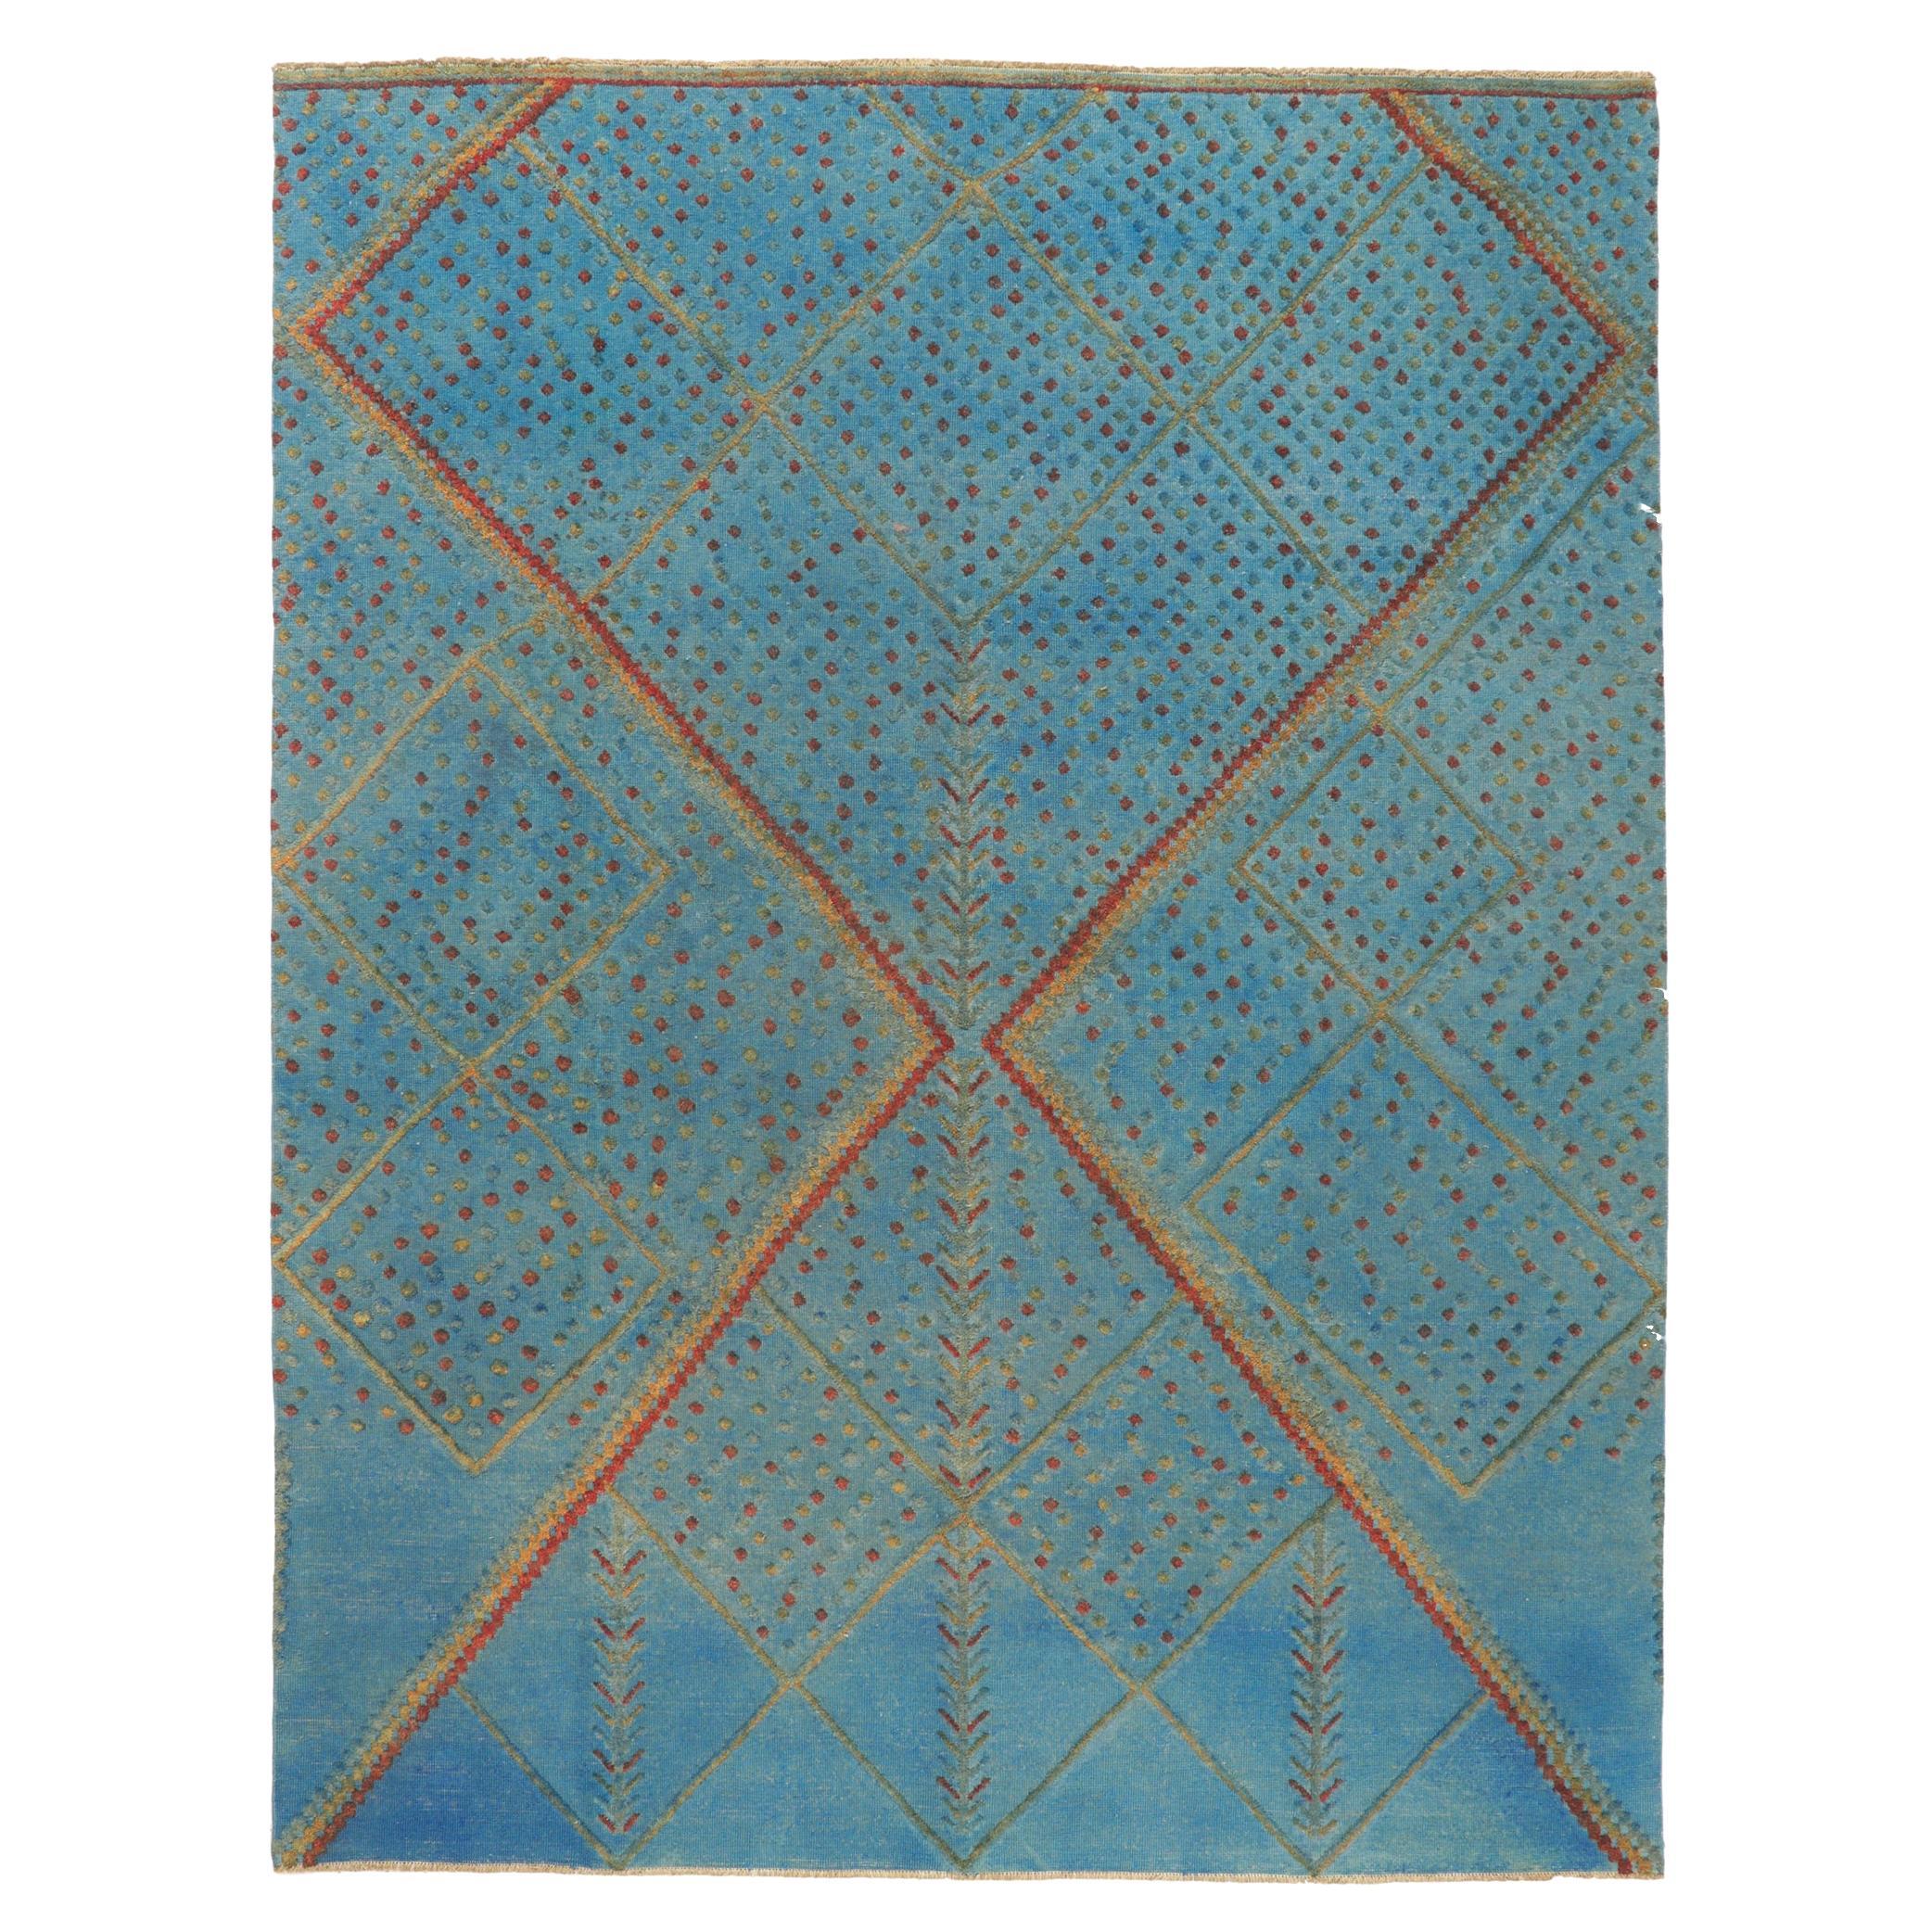 Nouveau tapis overdyed High-Low